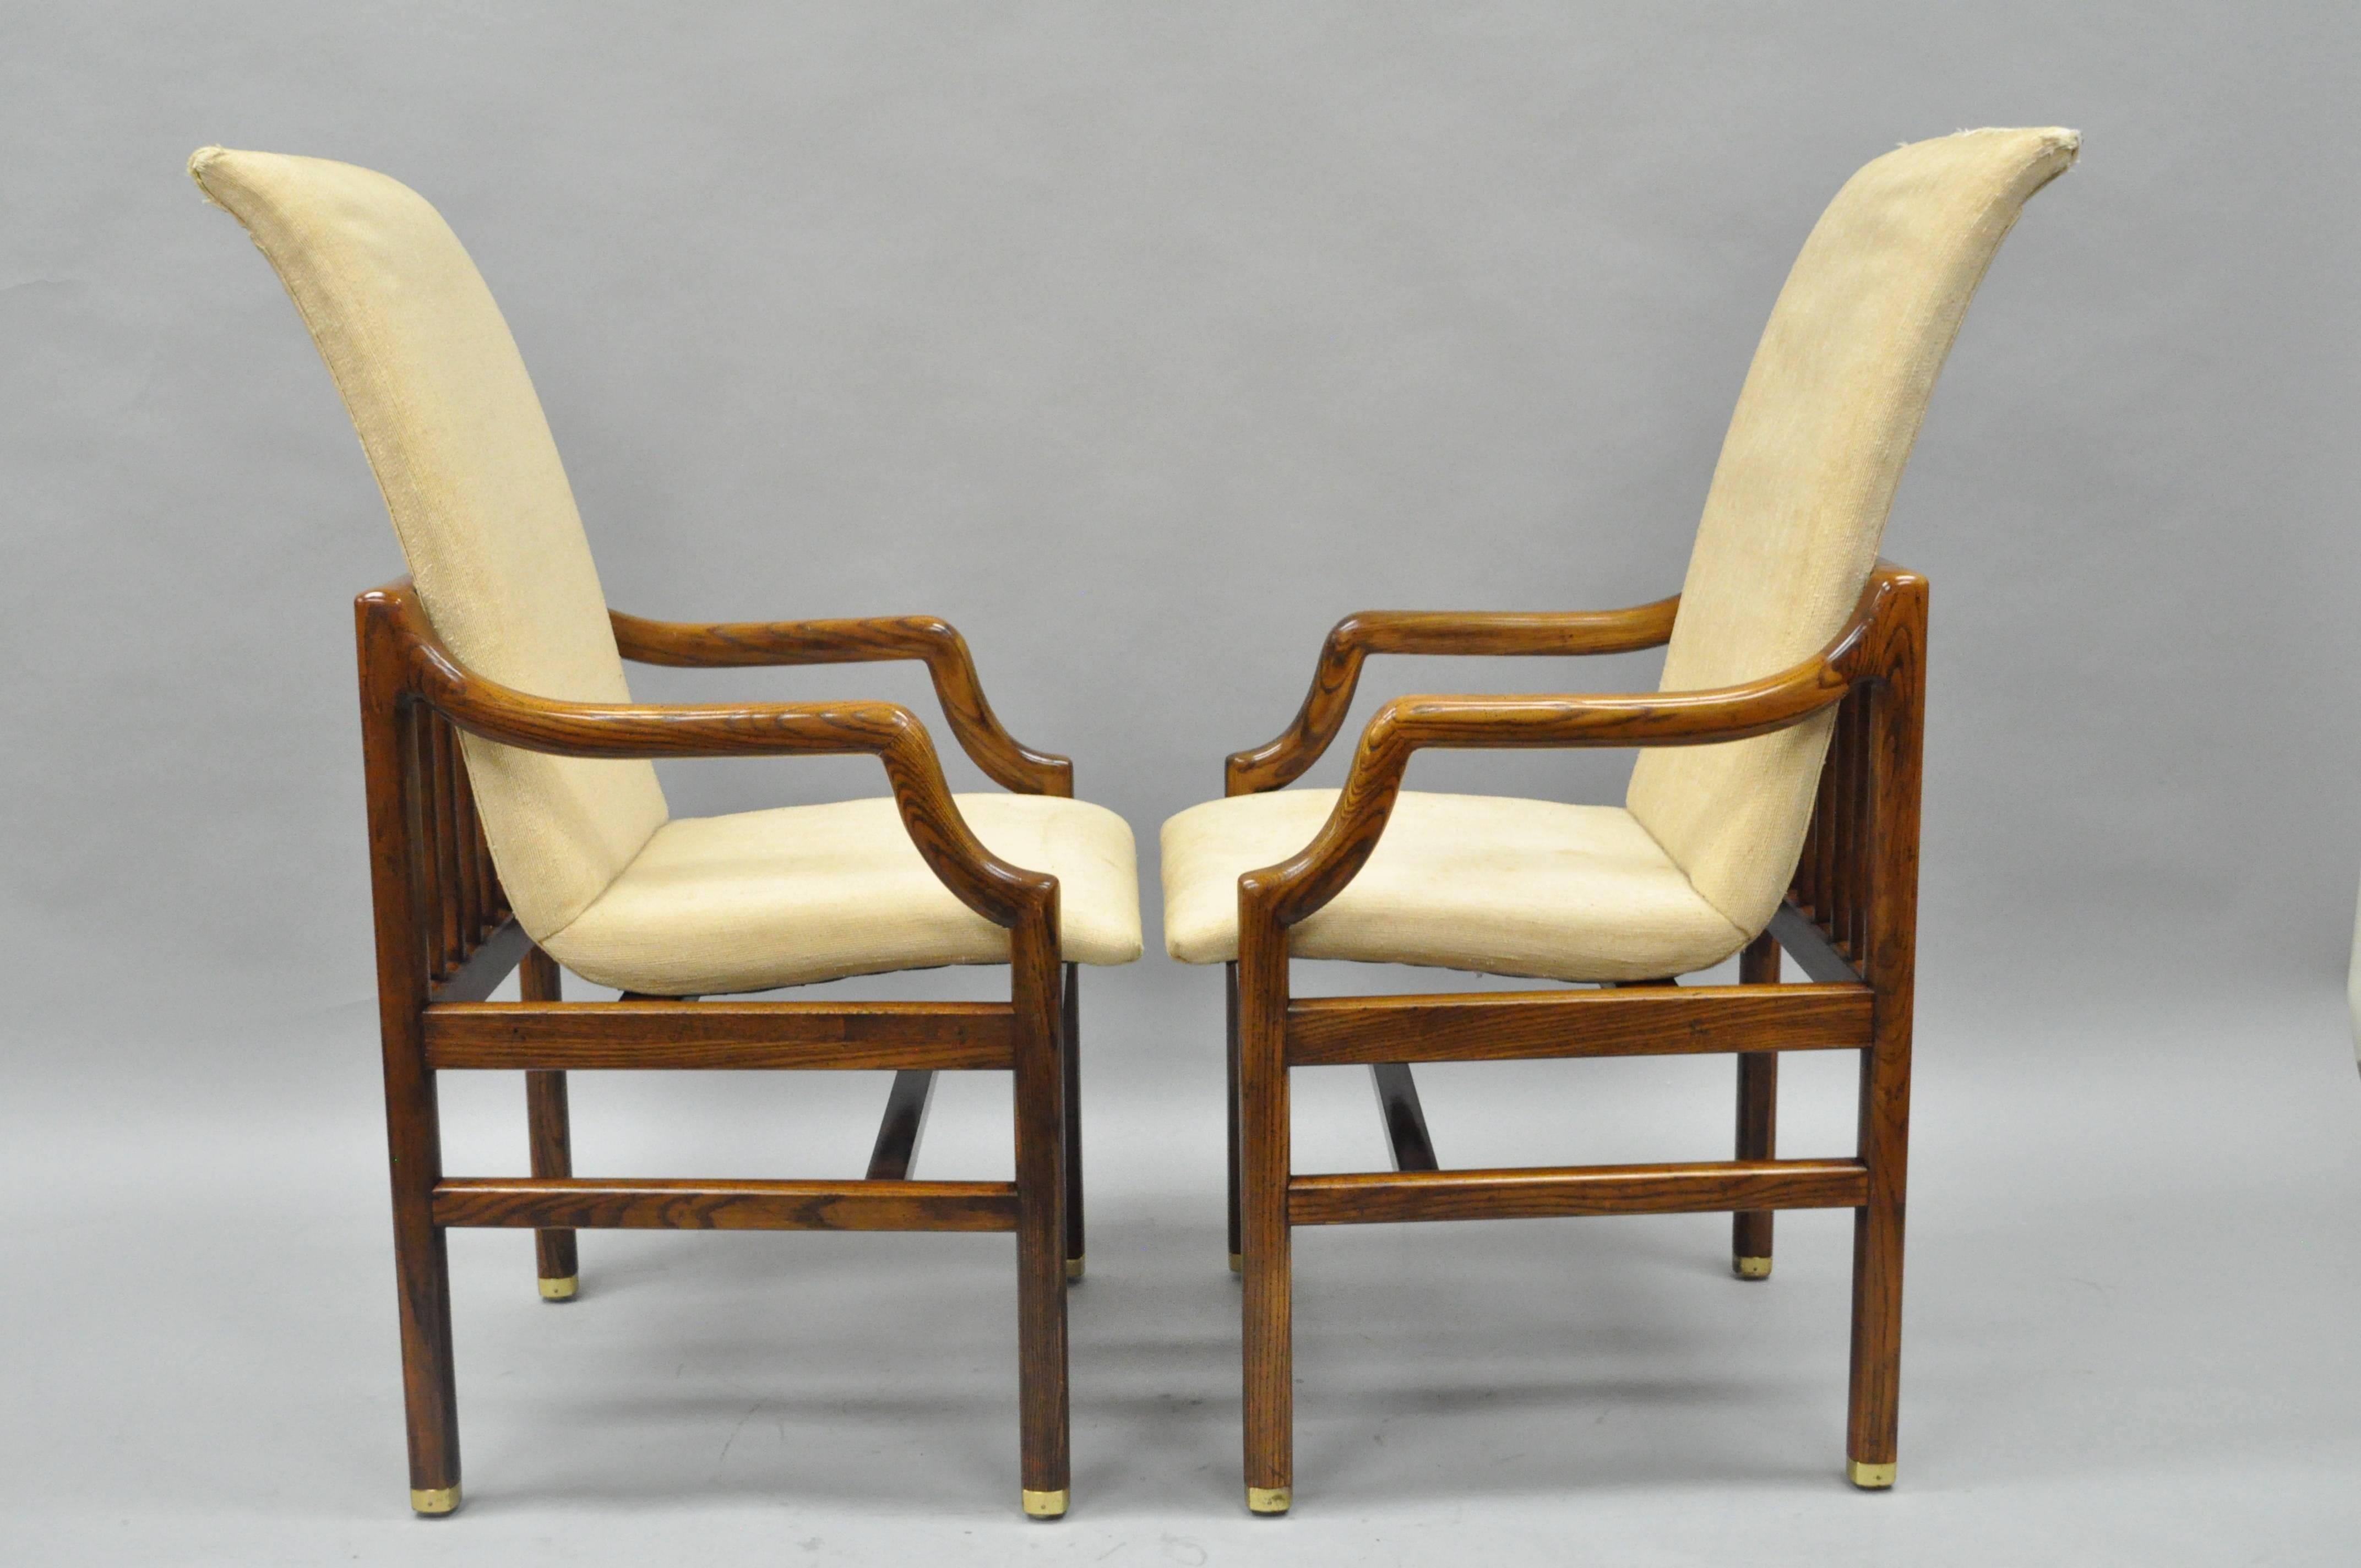 Pair of Vintage Mid-Century Modern Sculptural Arm Chairs by Henredon. Chairs feature solid oak wood floating form frames, tall sculptural backs with ladder back support, brass capped feet, stretcher bases, and attractive overall form. The style of